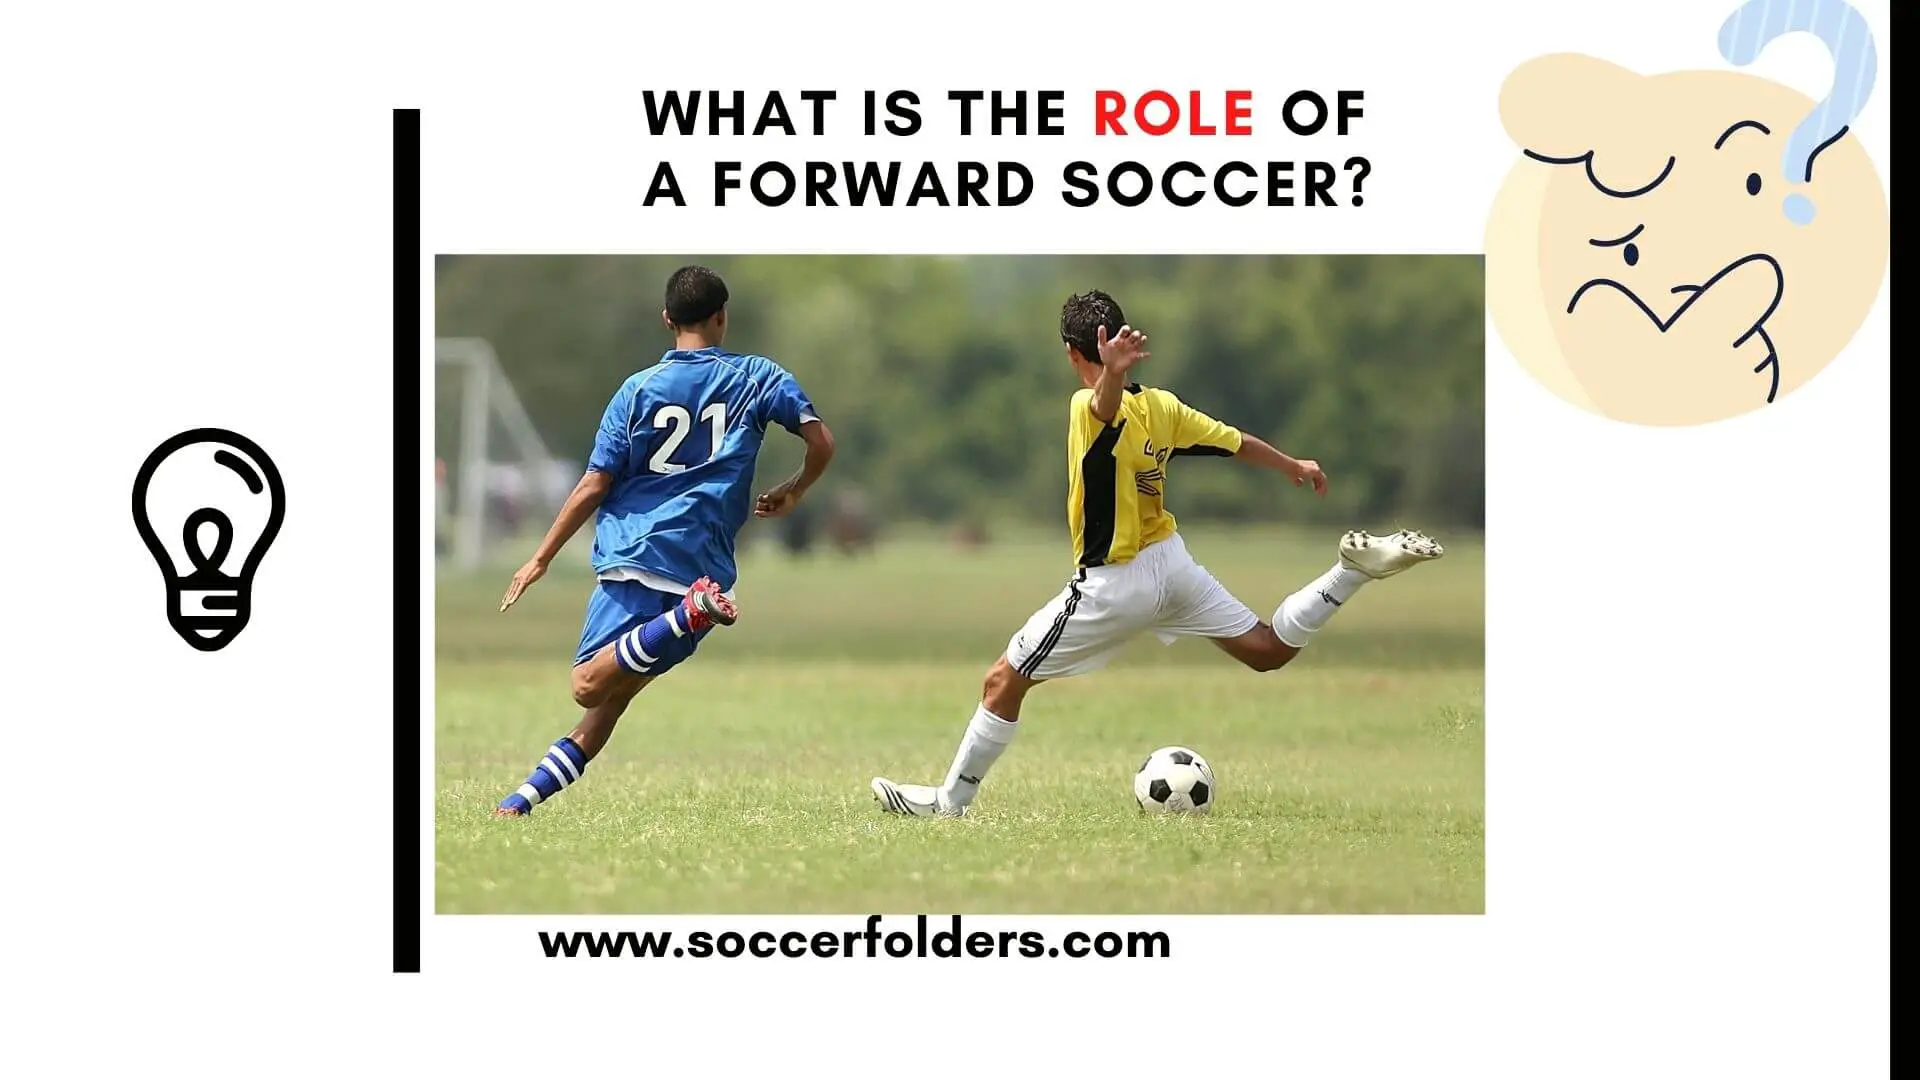 What is the role of a forward in soccer - Featured Image